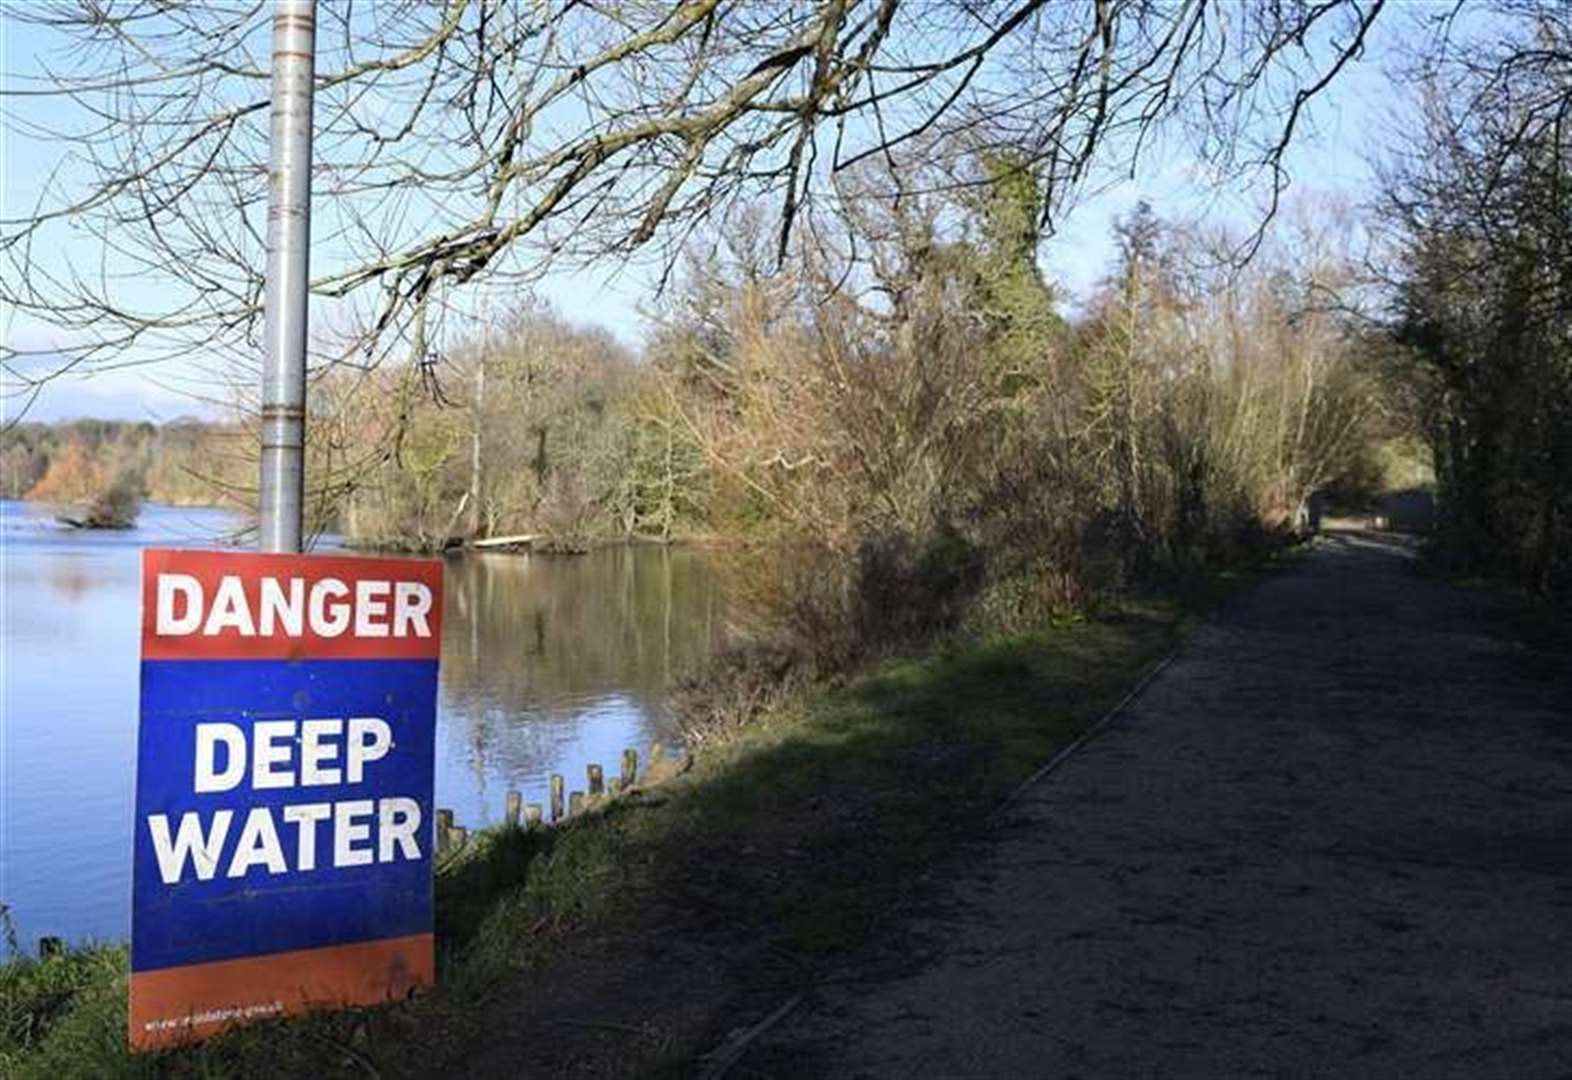 Flooding prevention work to start in Maidstone